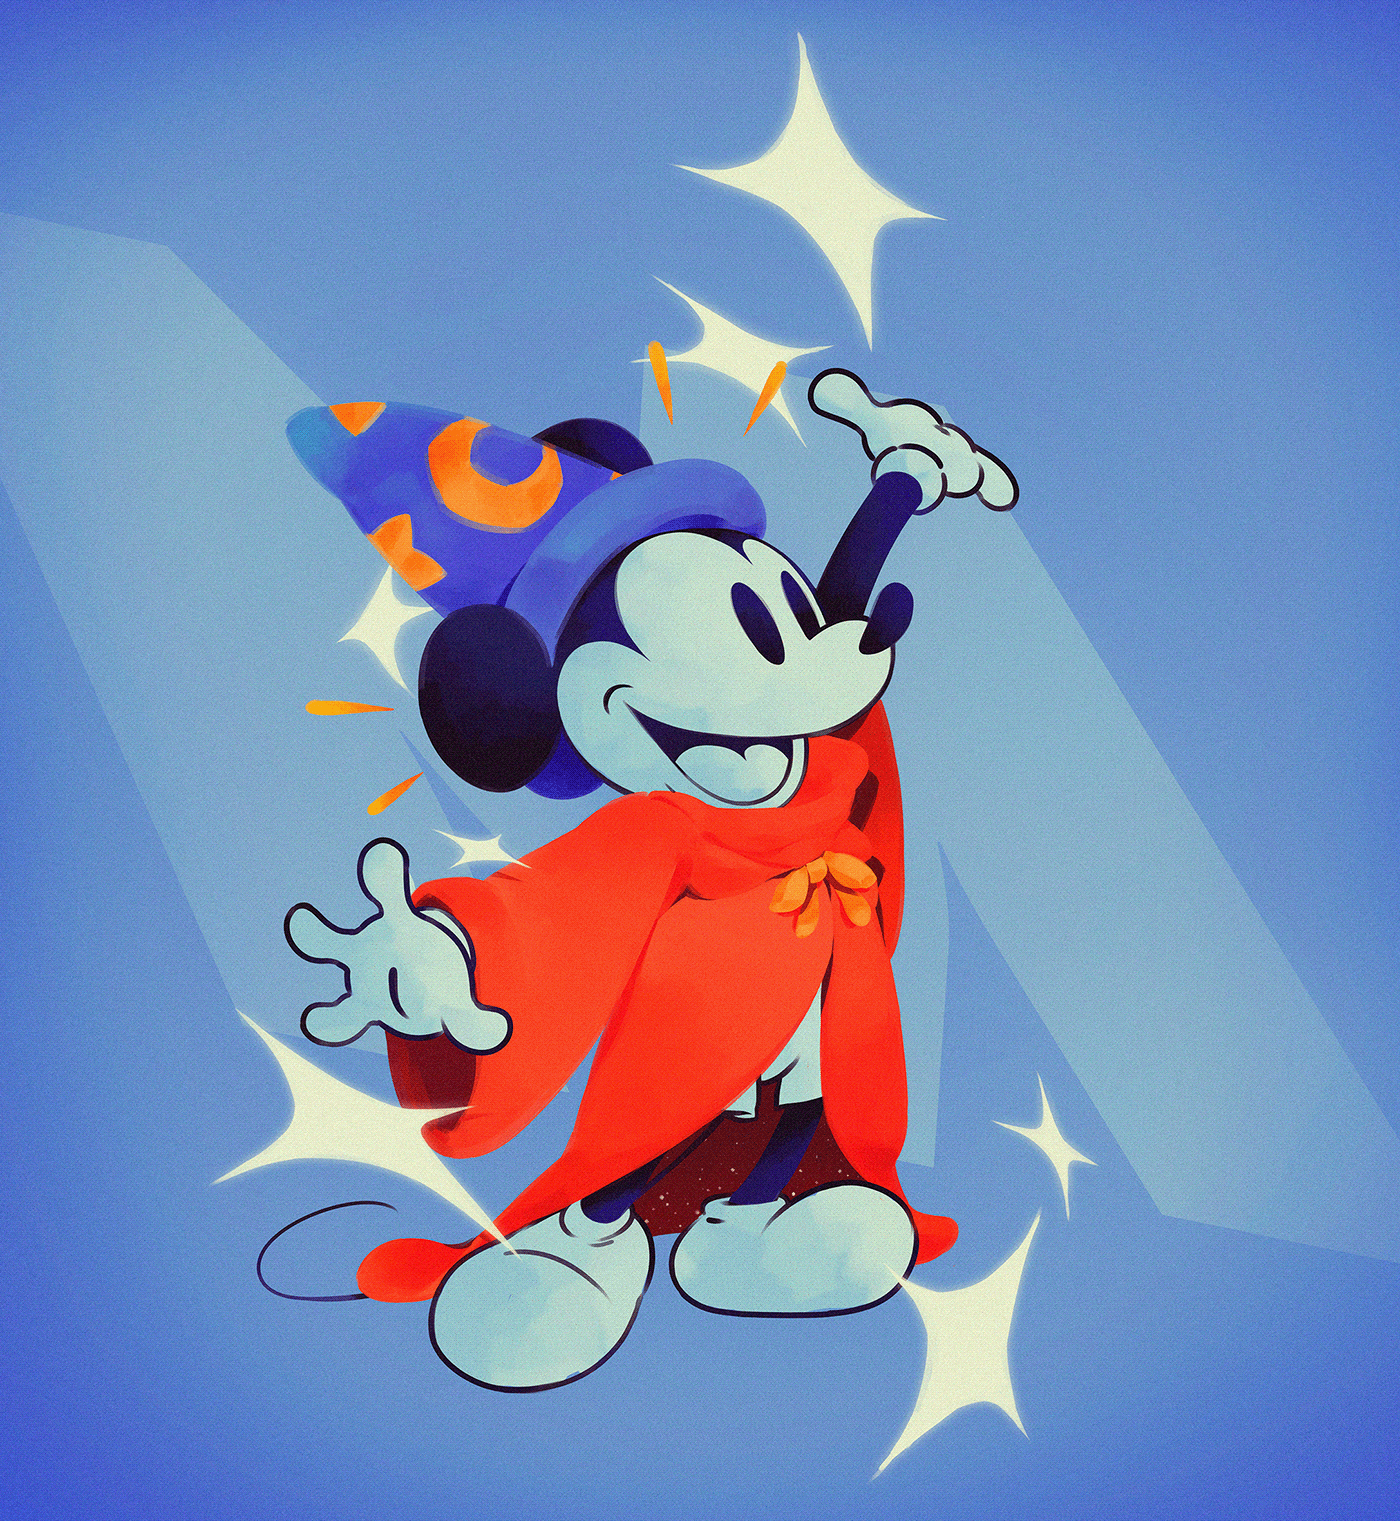 asessment fullcolor mickey twdc wacom